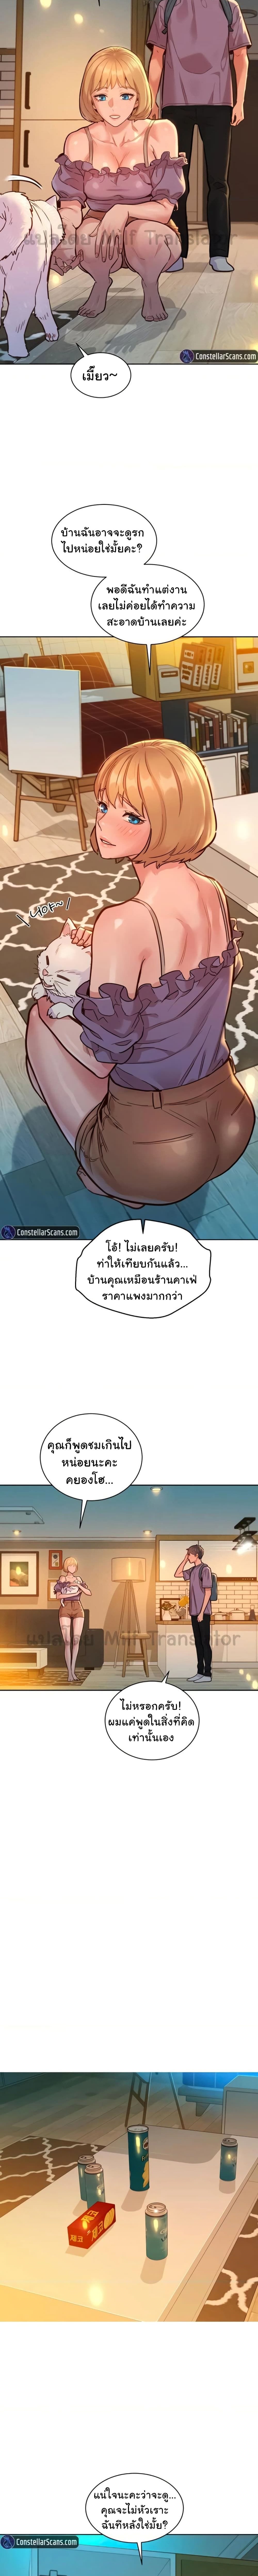 Let’s Hang Out from Today ตอนที่ 19 ภาพ 1